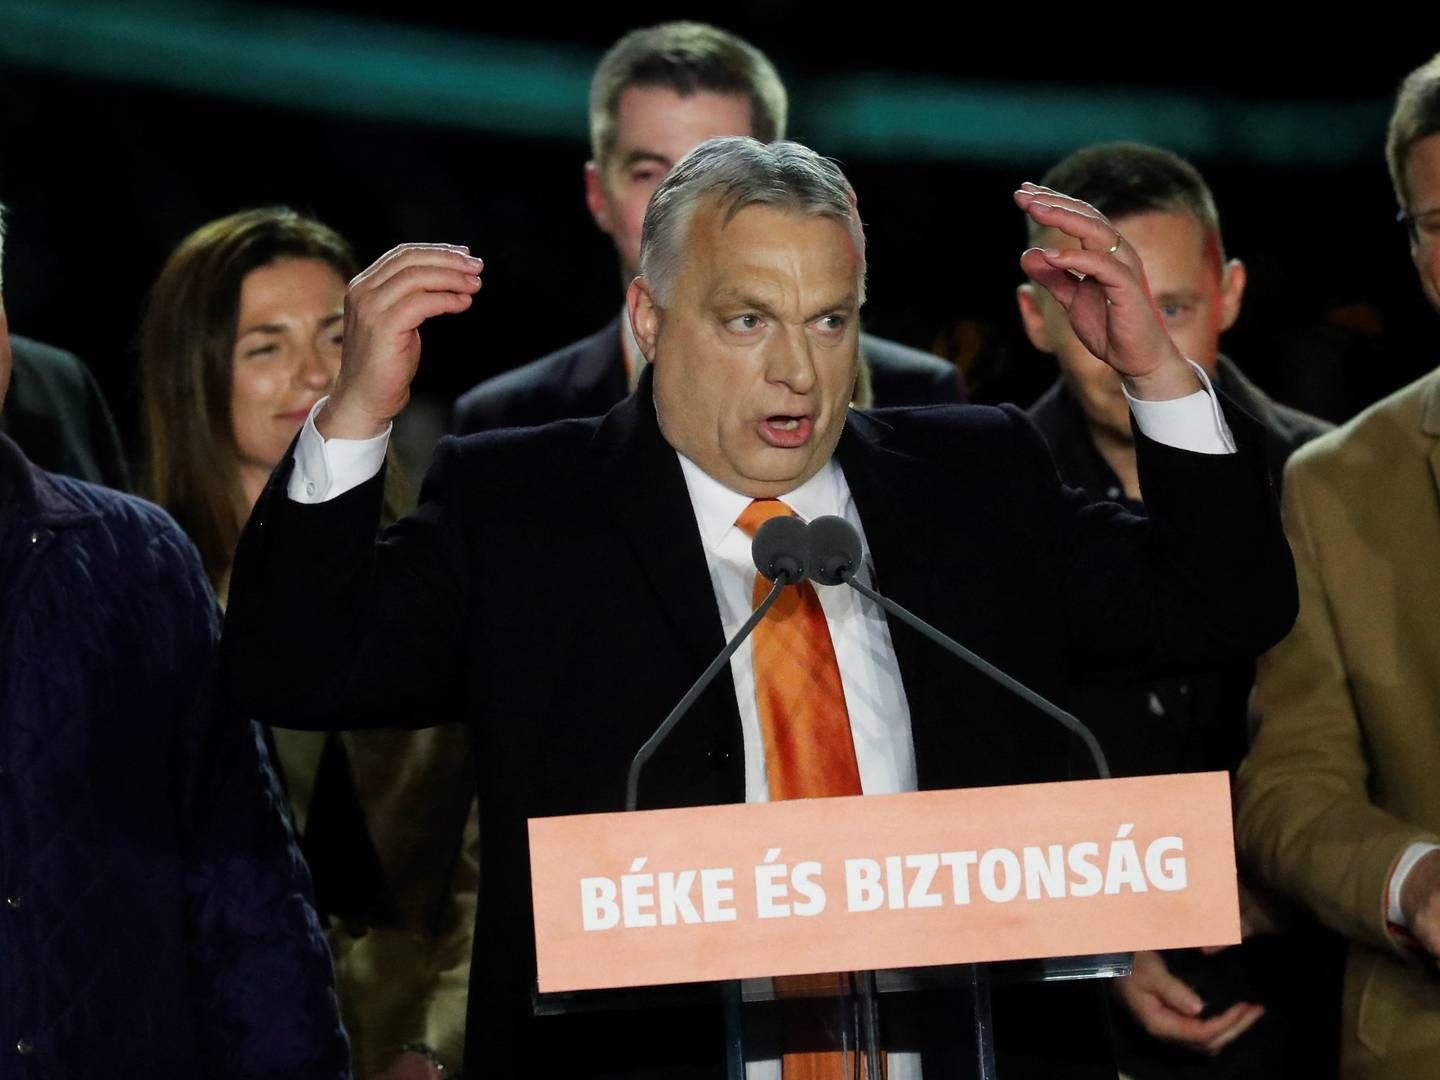 Viktor Orban's emphatic election victory in Hungary could cause division in the EU on further sanctions against Russia. | Photo: BERNADETT SZABO/REUTERS / X02784